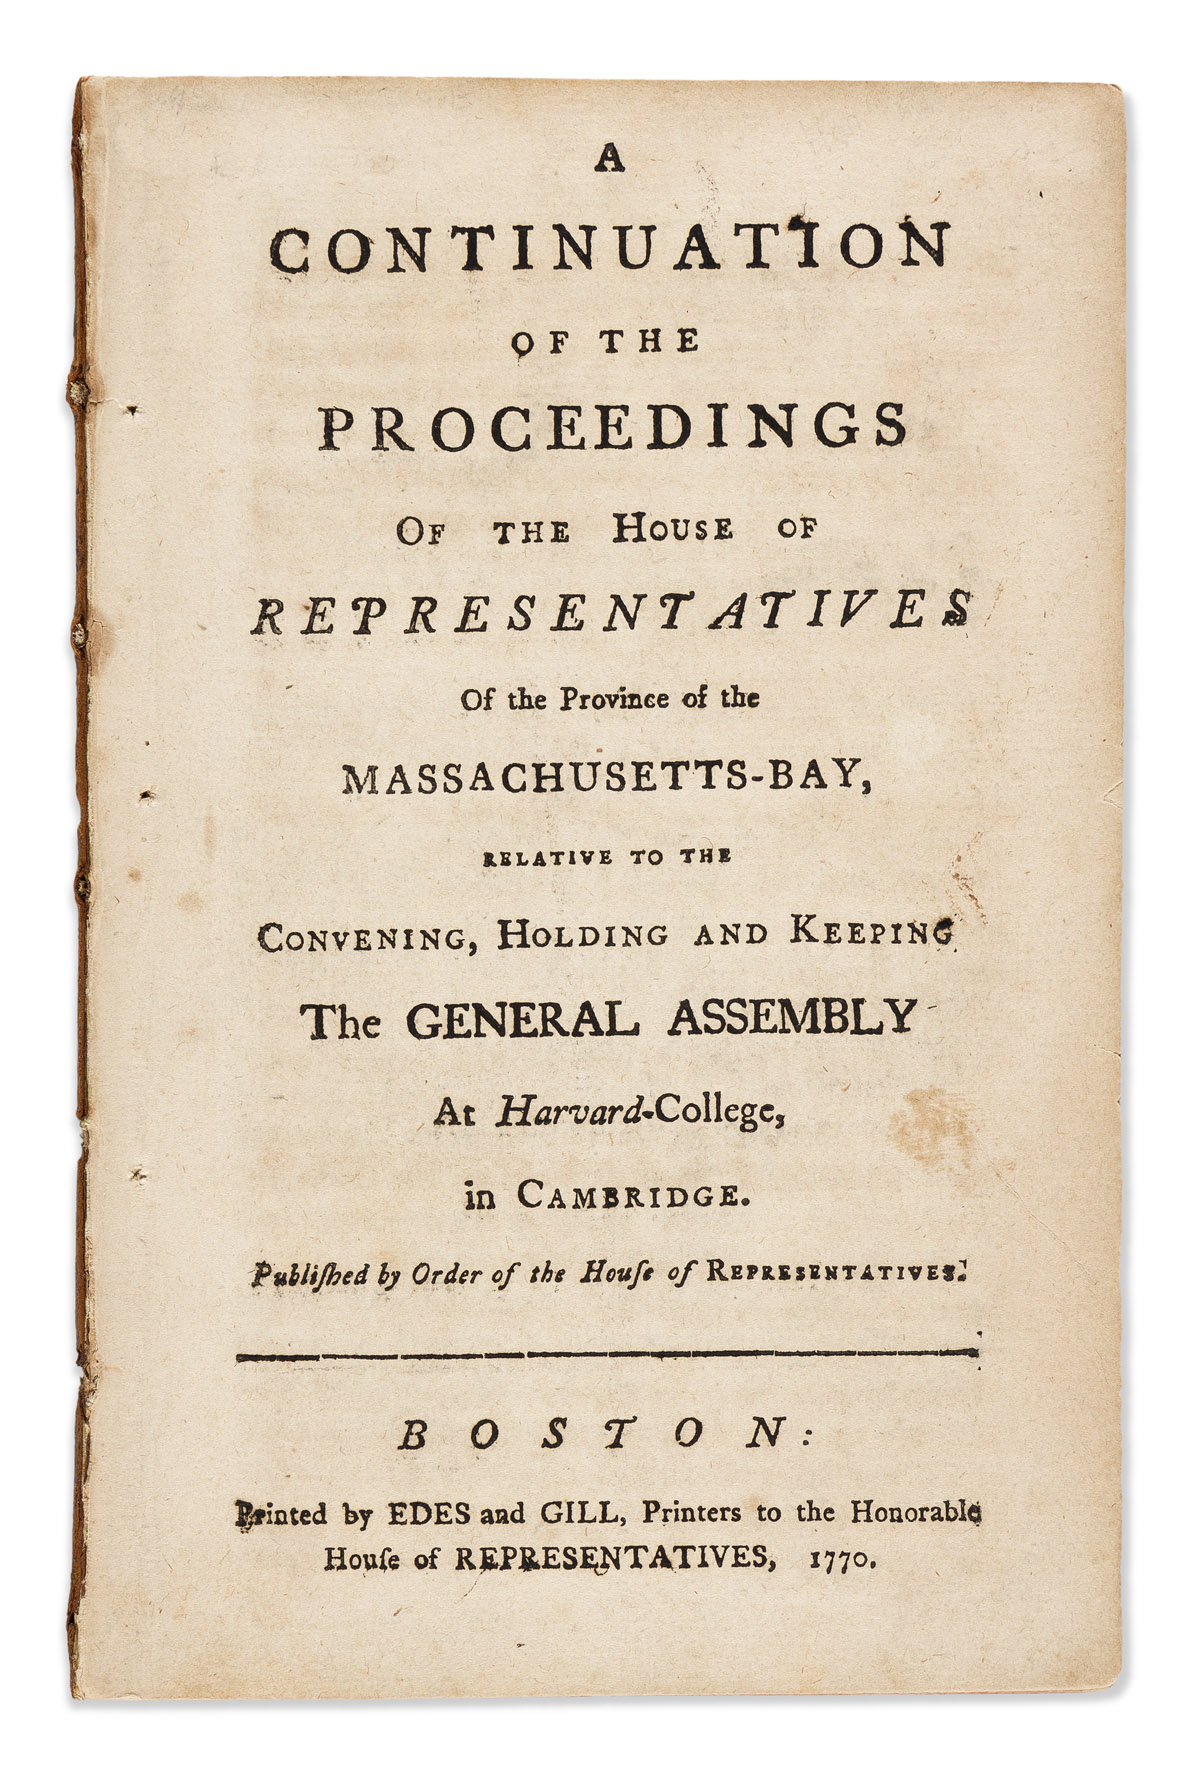 (AMERICAN REVOLUTION--PRELUDE.) A Continuation of the Proceedings of the House of Representatives of . . . Massachusetts-Bay,